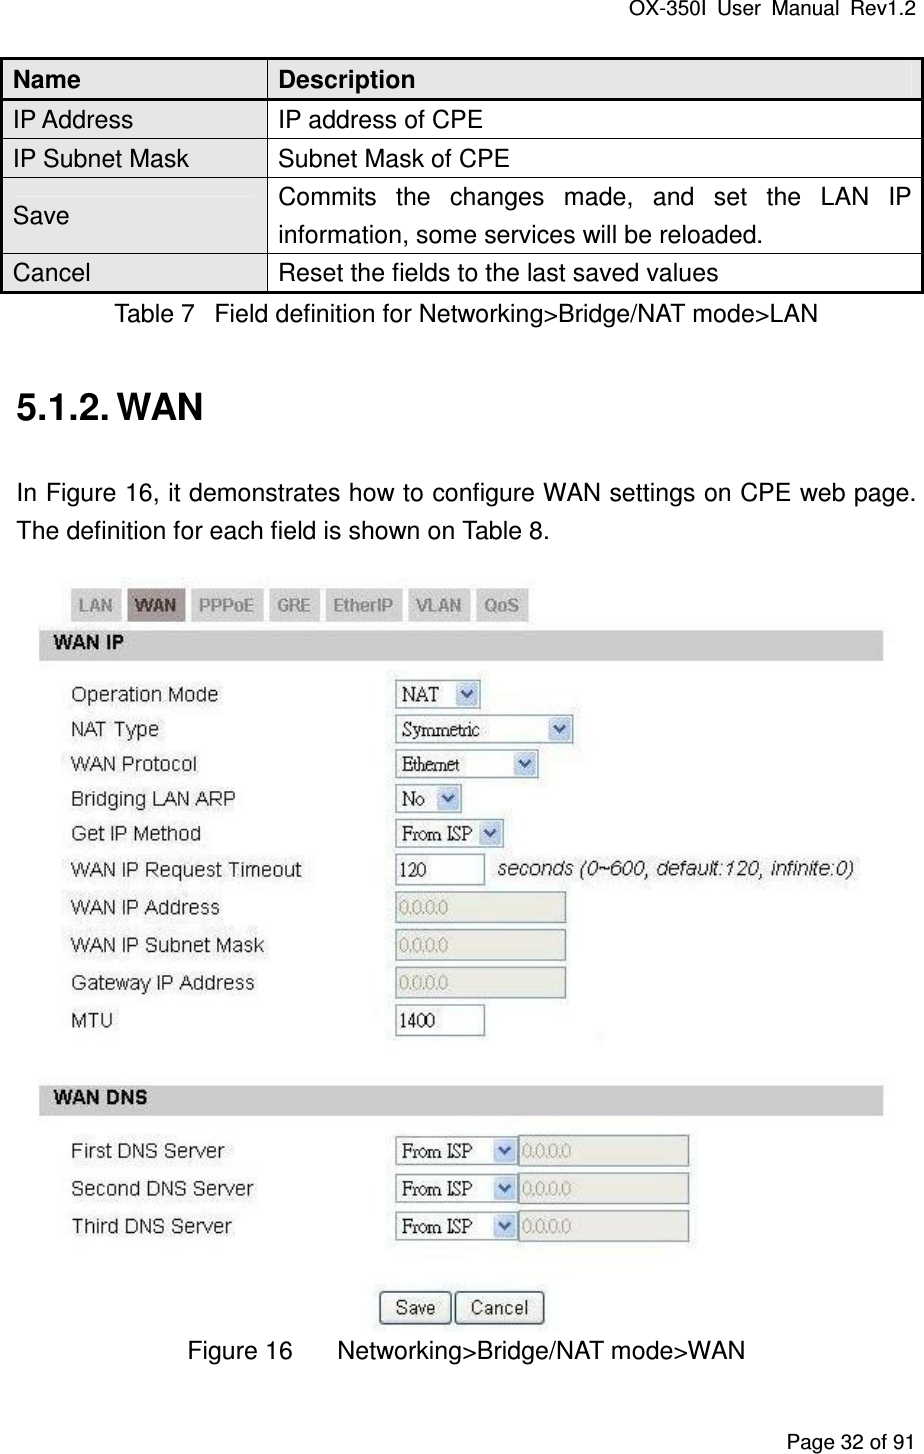 OX-350I  User  Manual  Rev1.2 Page 32 of 91 Name  Description IP Address  IP address of CPE IP Subnet Mask  Subnet Mask of CPE Save  Commits  the  changes  made,  and  set  the  LAN  IP information, some services will be reloaded. Cancel  Reset the fields to the last saved values Table 7  Field definition for Networking&gt;Bridge/NAT mode&gt;LAN 5.1.2. WAN In Figure 16, it demonstrates how to configure WAN settings on CPE web page. The definition for each field is shown on Table 8.  Figure 16  Networking&gt;Bridge/NAT mode&gt;WAN 